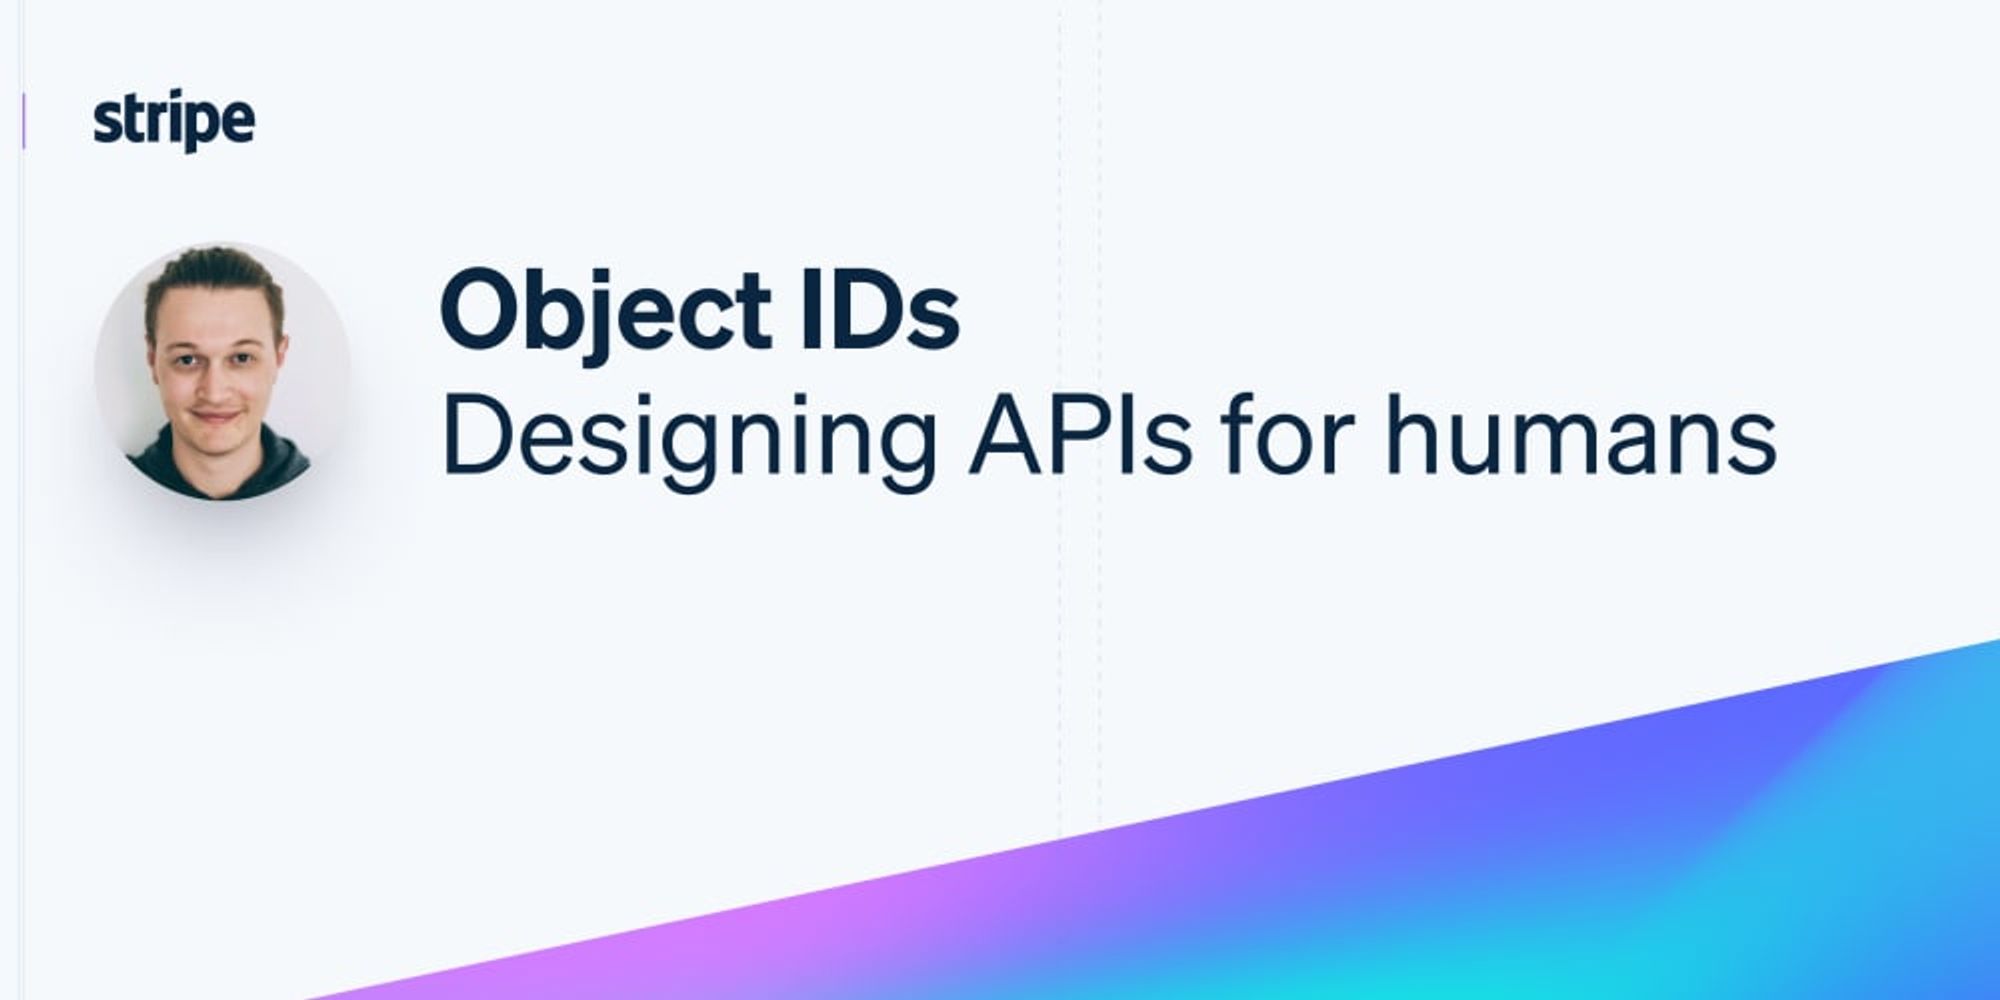 Designing APIs for humans: Object IDs